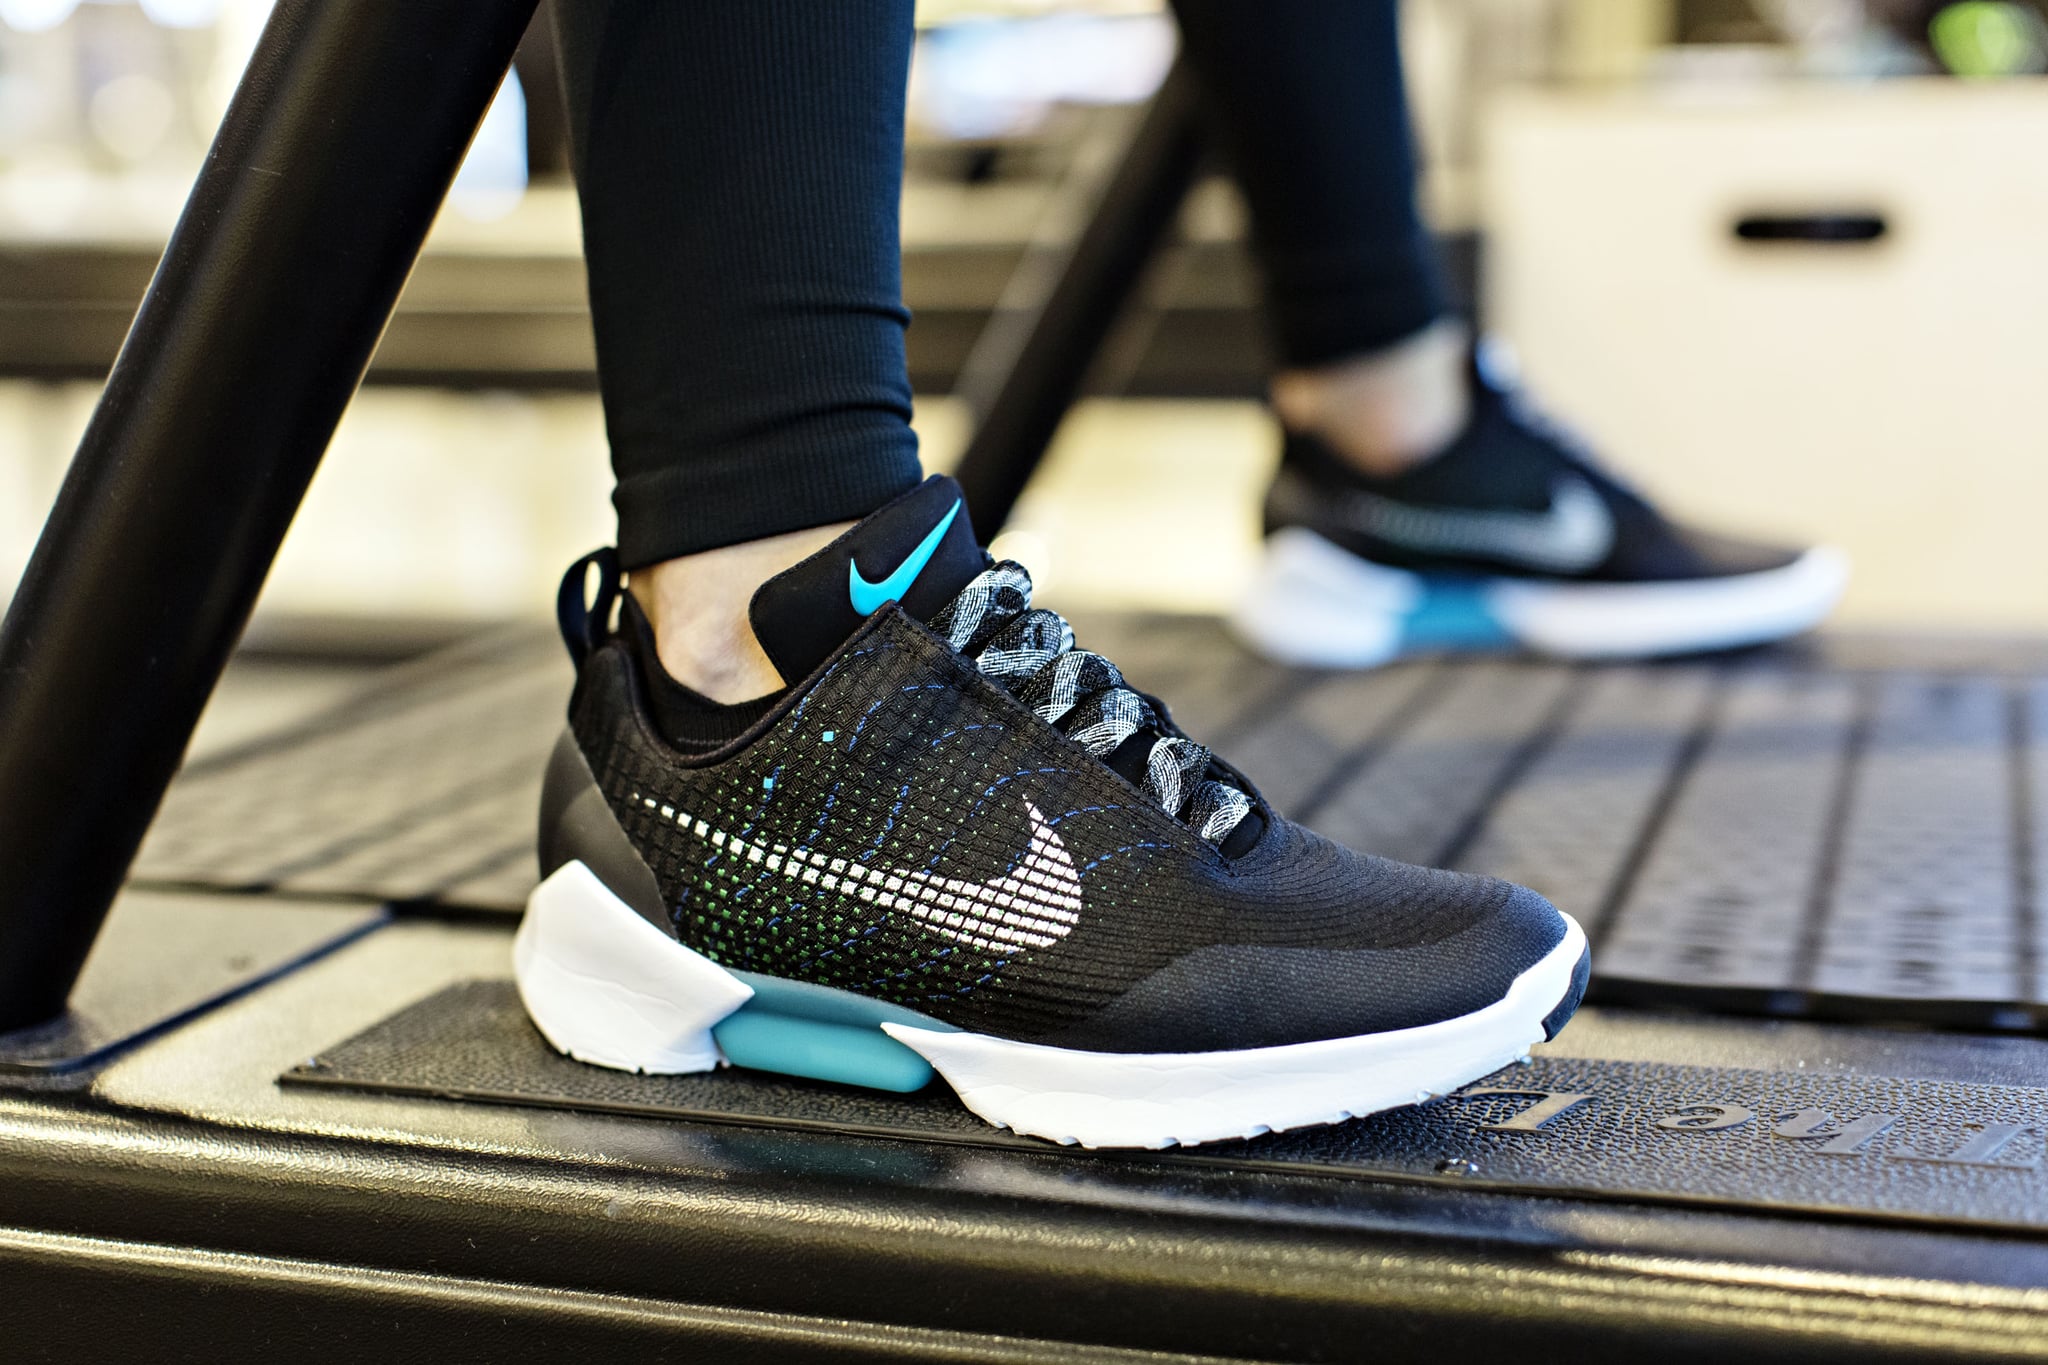 Nike HyperAdapt 1.0 Workout Review 